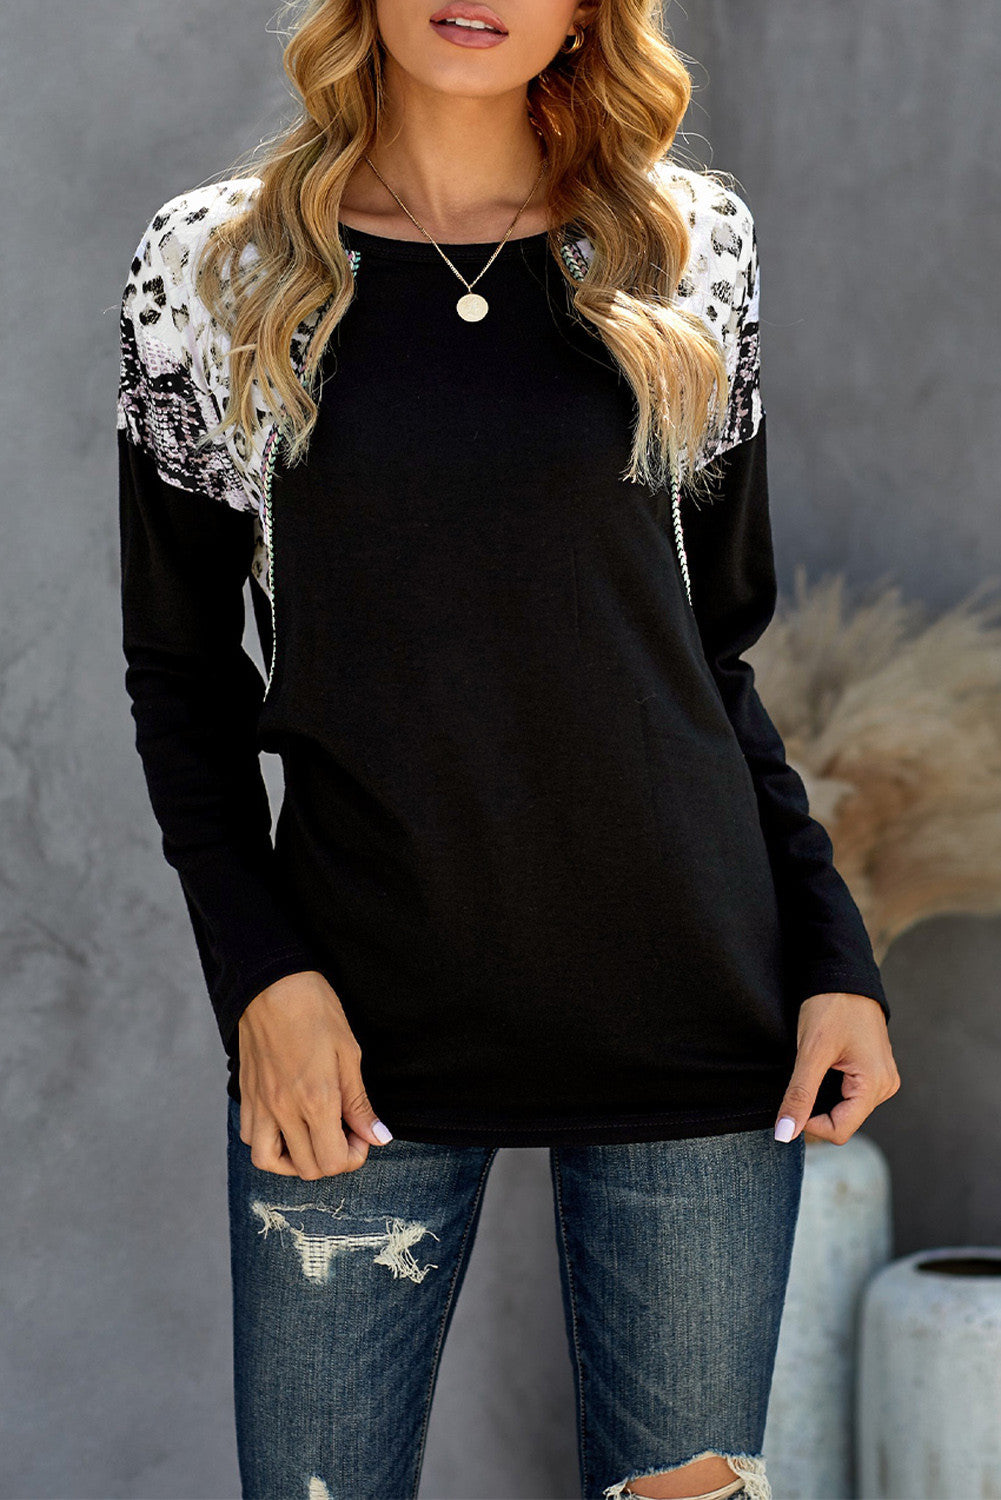 Long Sleeve Top With Leopard Snakeskin Print